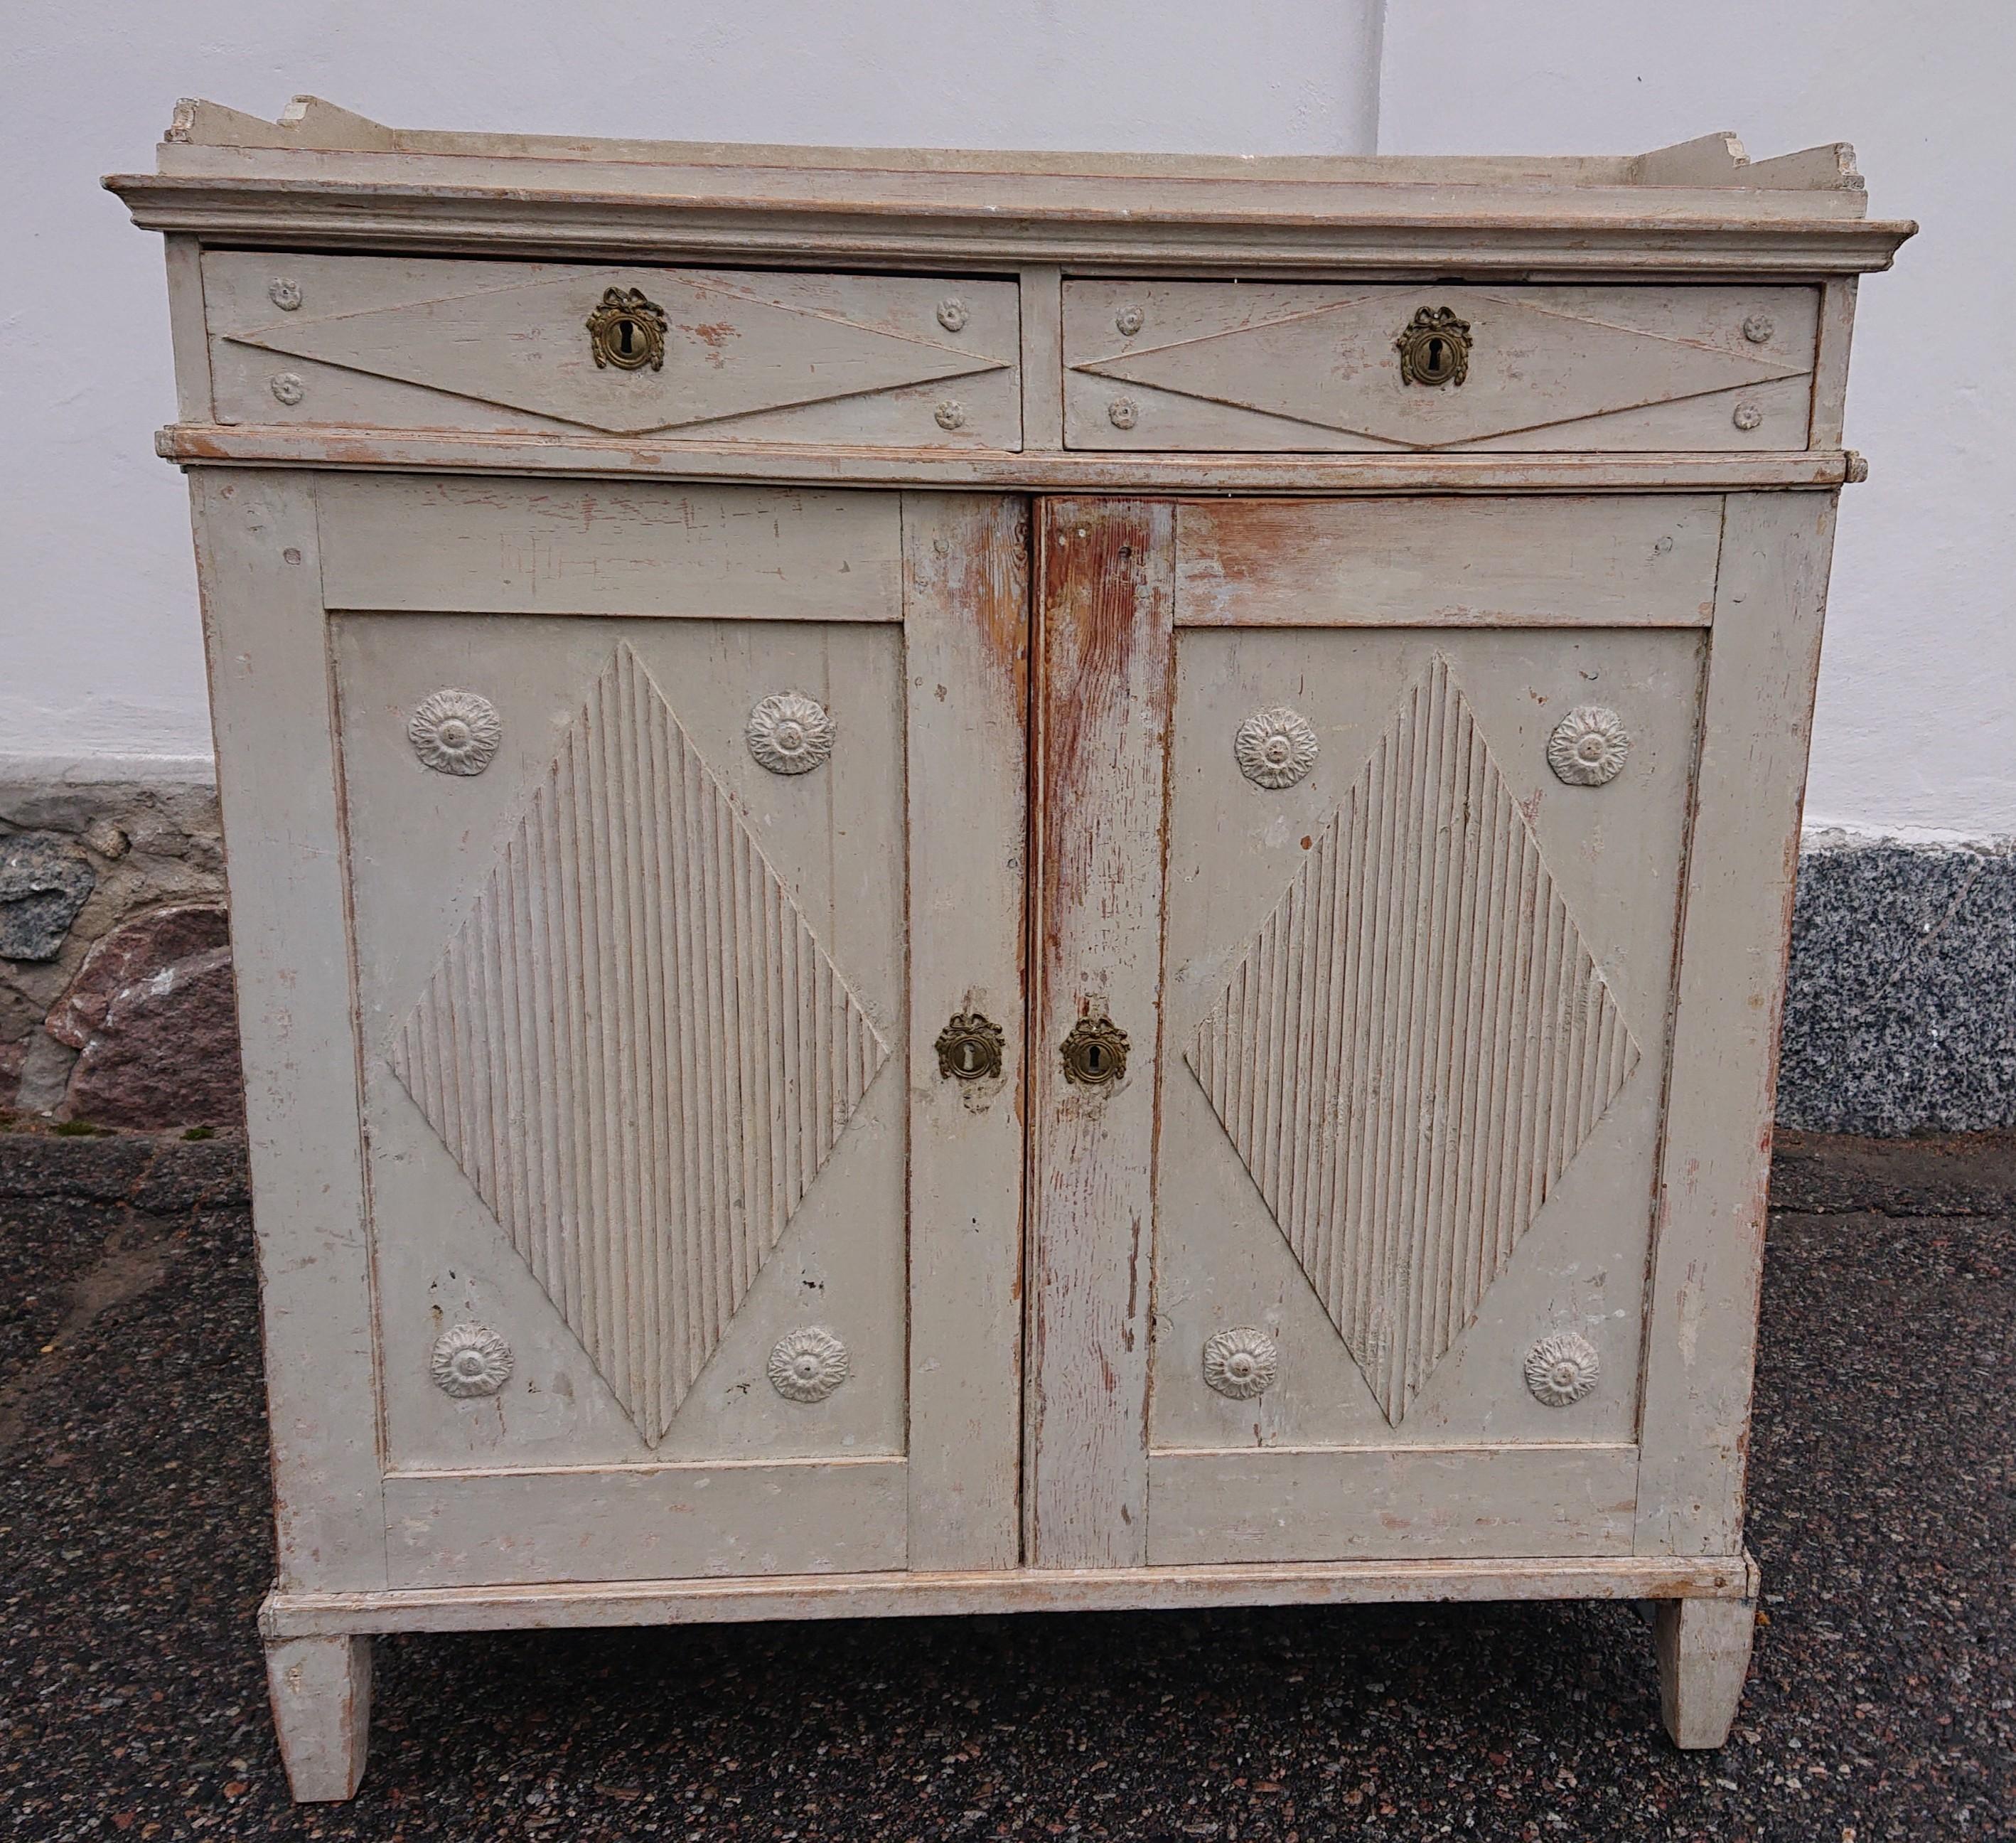 Exceptional Gustavian Buffet. Stockholm Sweden circa 1780-1800. Nice details and proportion from higher class environment. Dryscraped by hand to its well preserved original condition.
Hand-planed rhombuses on the doors and drawers. Fine pastel